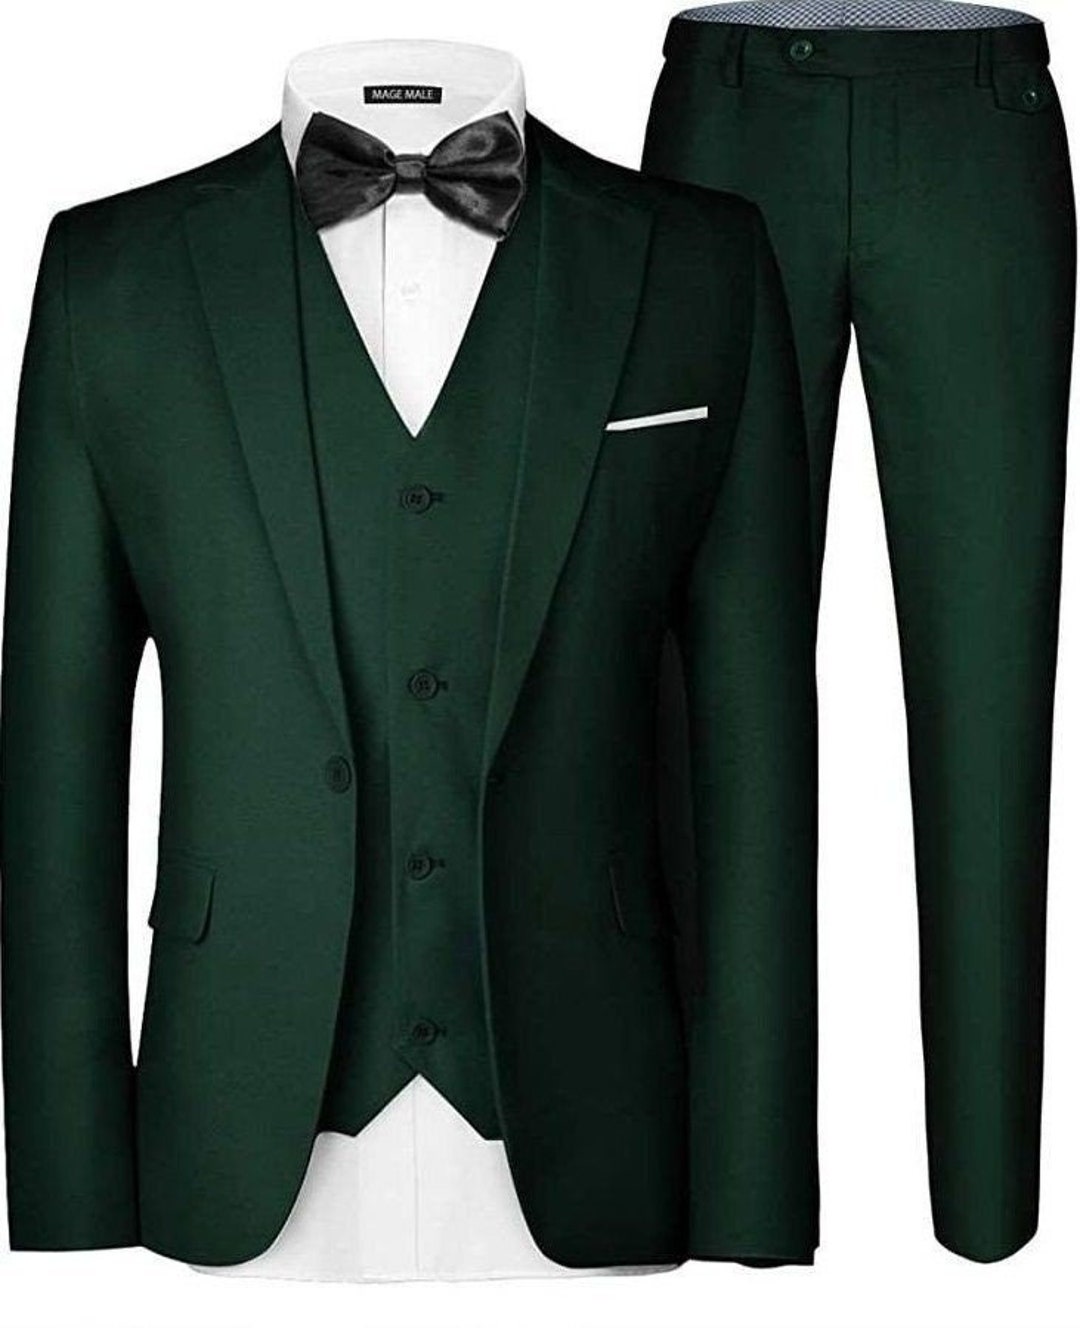 Buy New Handmade Bottle Green Color 3 Piece Suit for Men for Wedding Party  and Events and Festive Occasions Online in India - Etsy